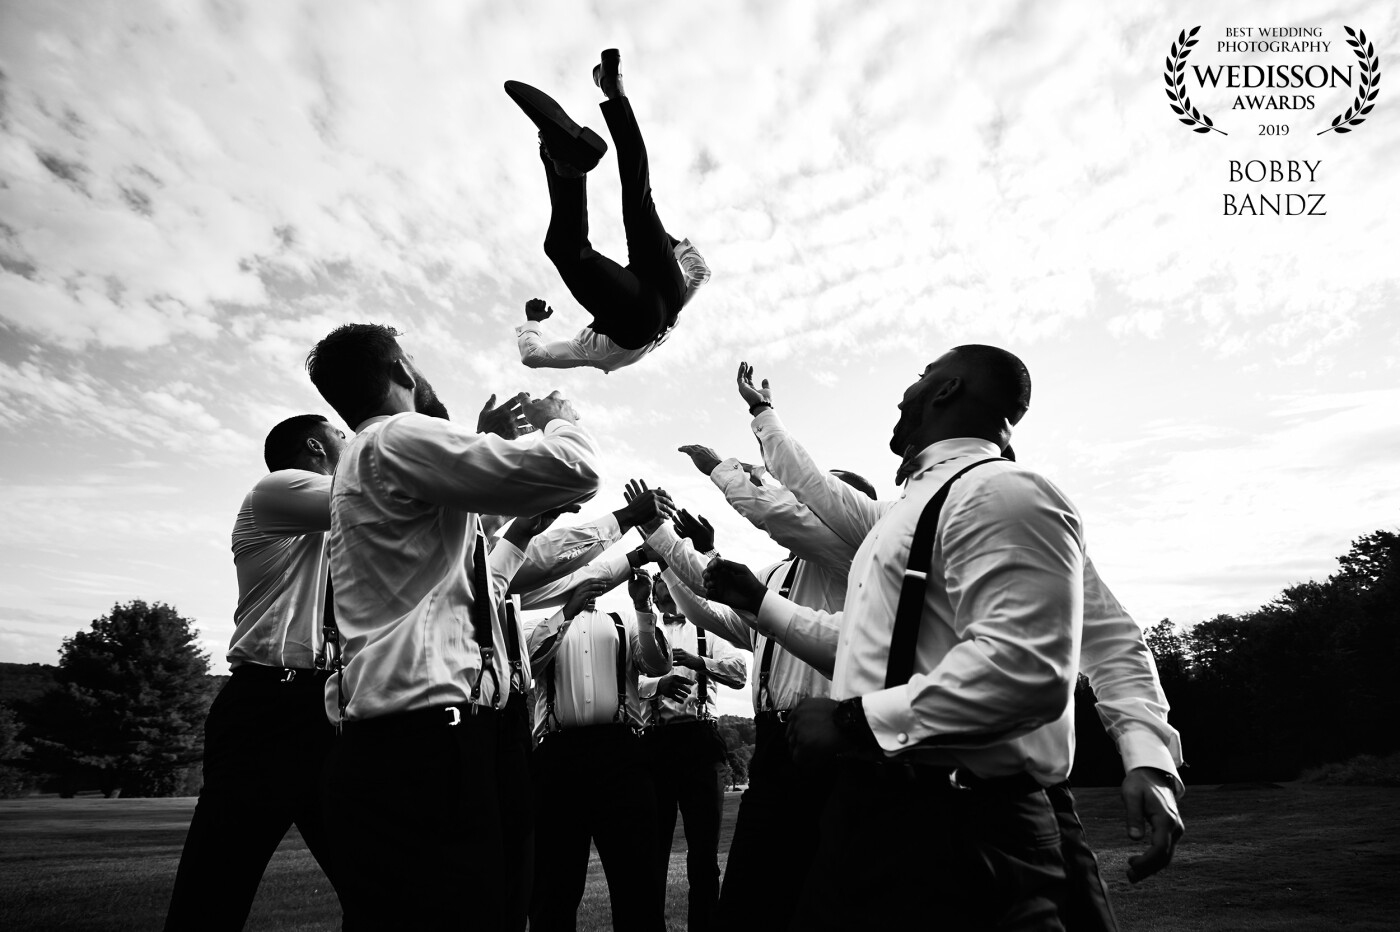 When you get to shoot one of your best friend’s weddings and all your friends are in the wedding party...yea you celebrate hard! And by celebrate we mean try to throw the groom as high as possible and make sure he doesn’t land on his head! What a day! 